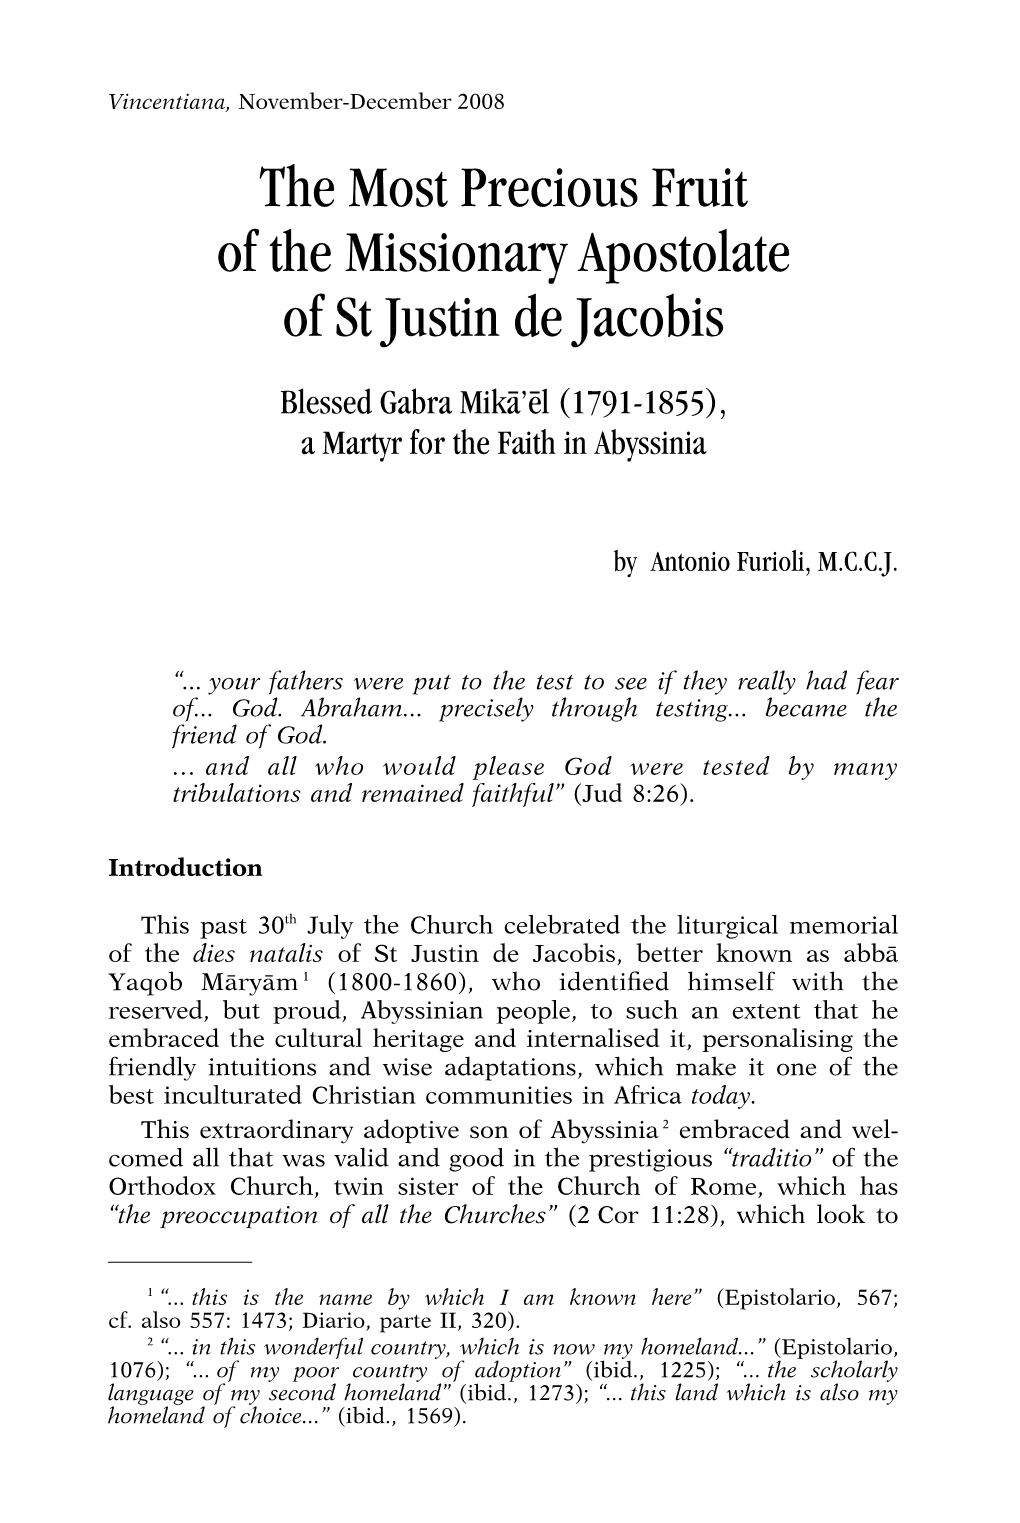 The Most Precious Fruit of the Missionary Apostolate of St Justin De Jacobis